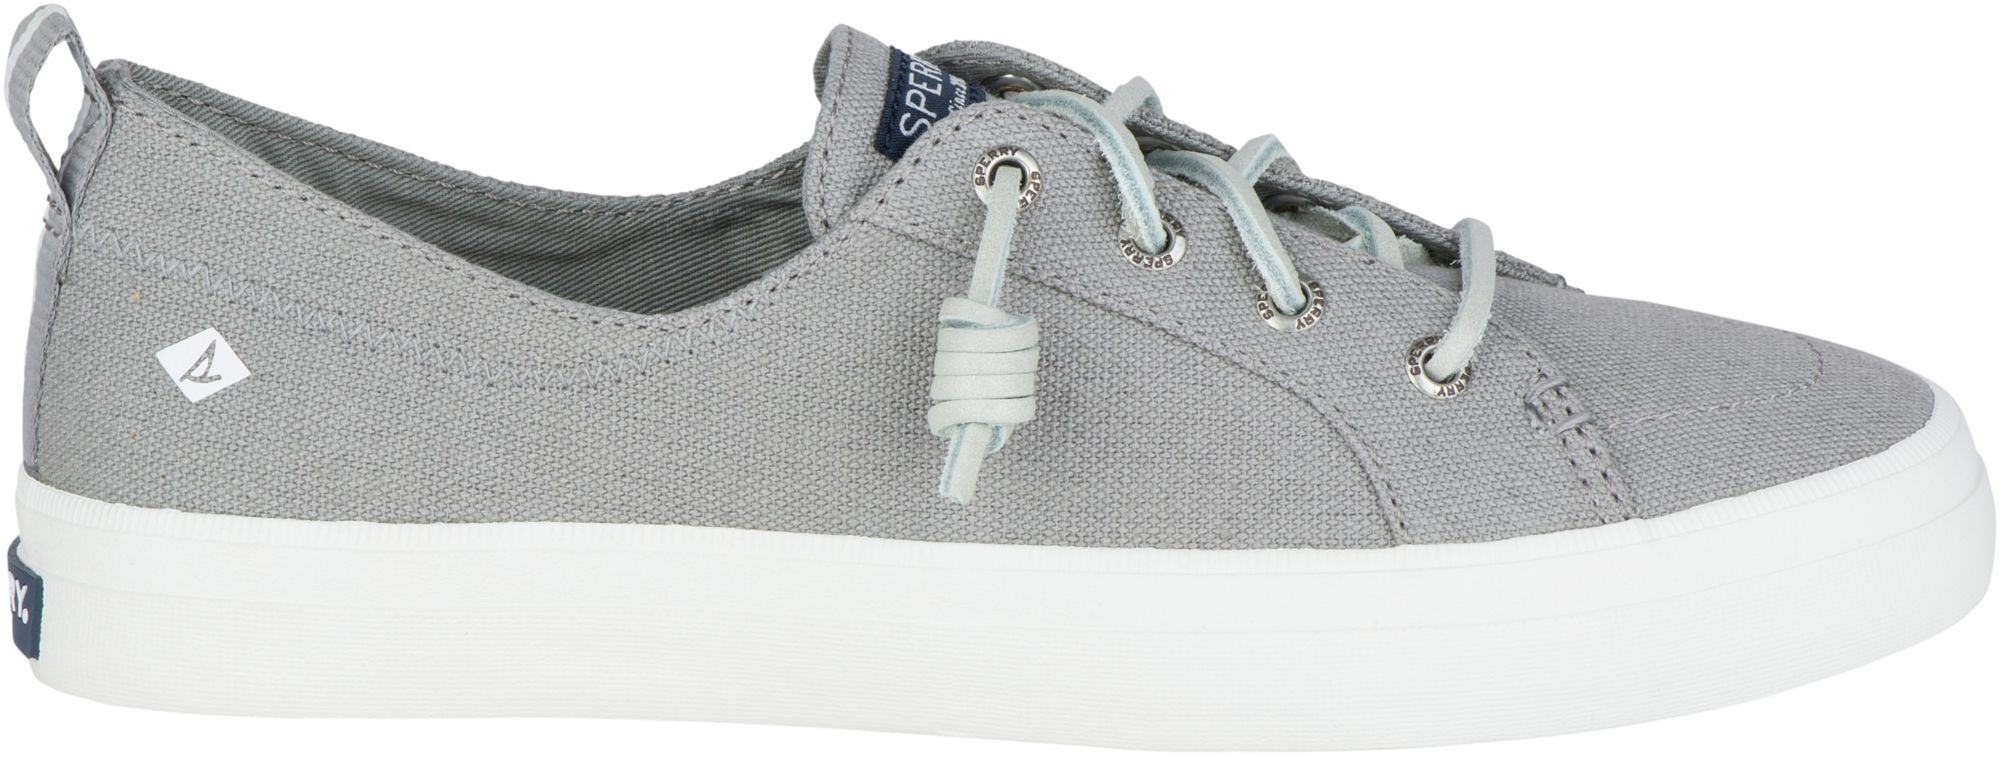 sperry women's casual shoes